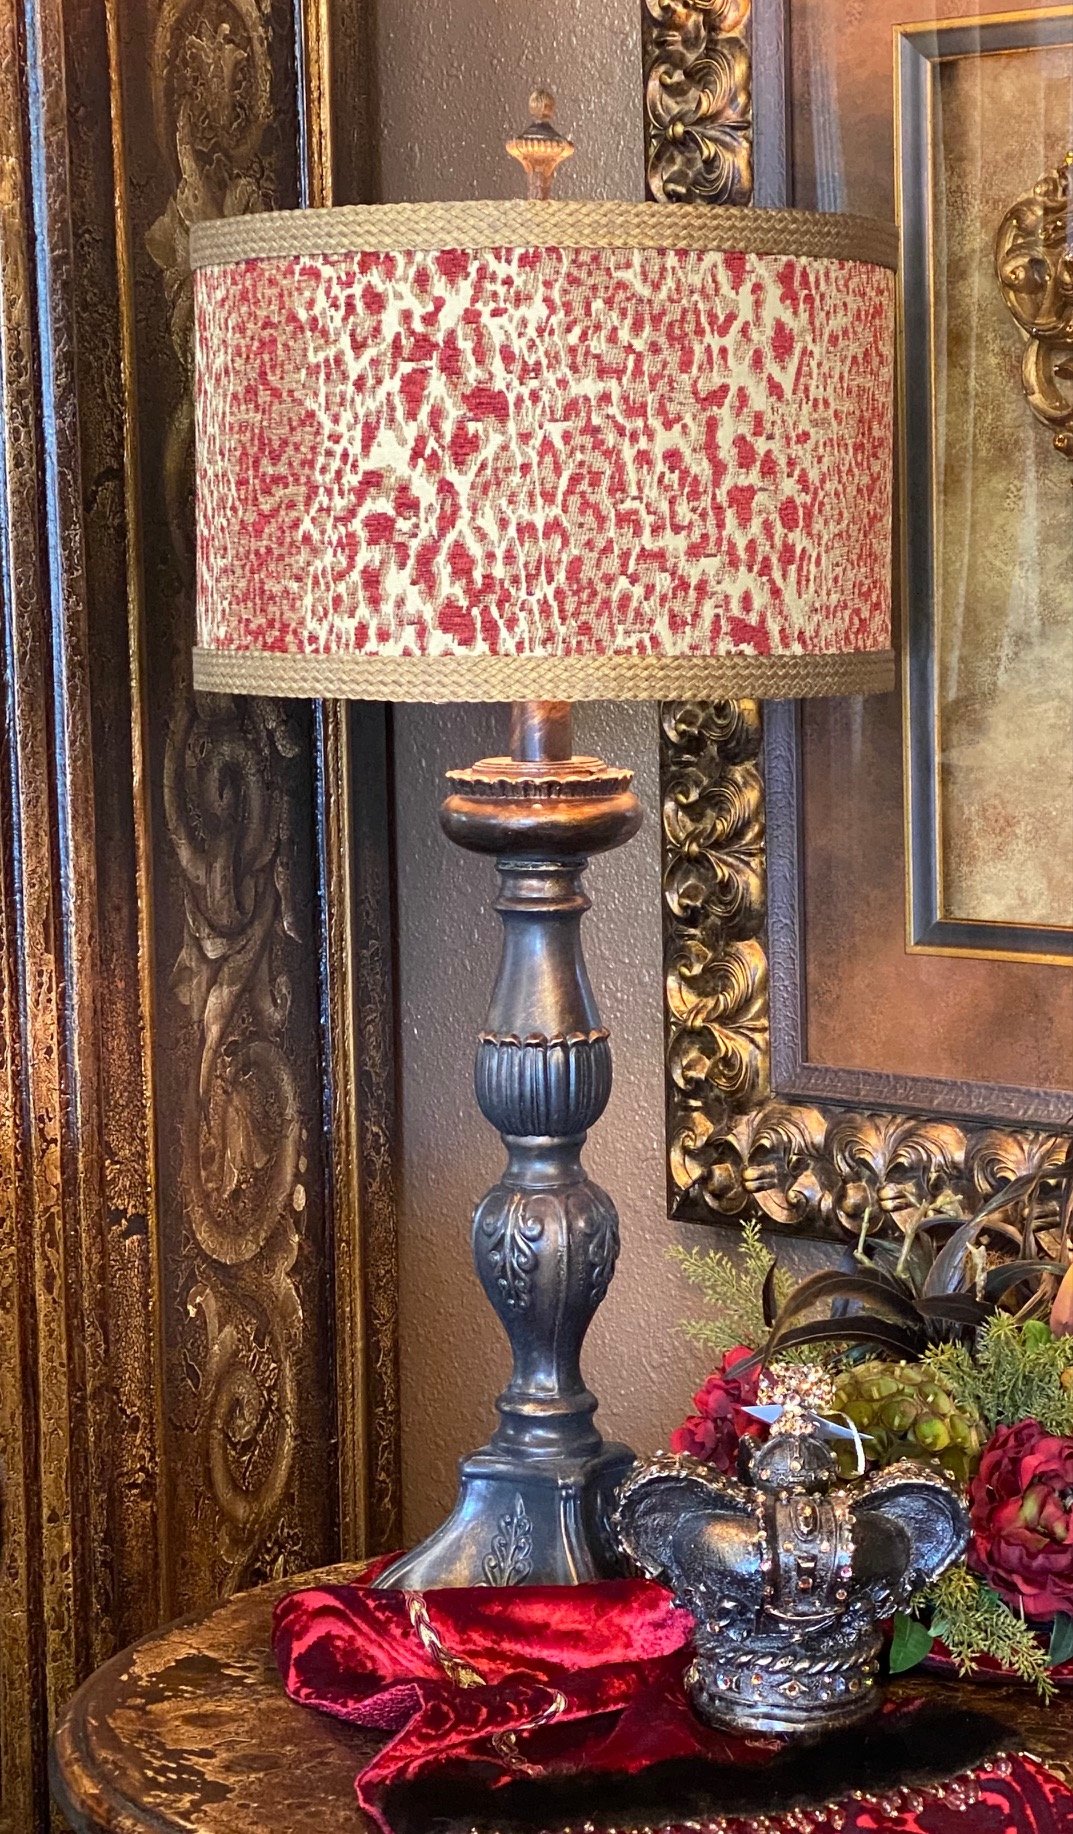 https://reilly-chanceliving.com/cdn/shop/products/Buffet_lamps-popular_table_lamps-bedroom_lamp-living_room_lamps-Gallery_designs_lamps-old_world_lamps-reilly_chance_c1065d6d-f6e6-402b-b34d-c64d973aa074.jpg?v=1628465018